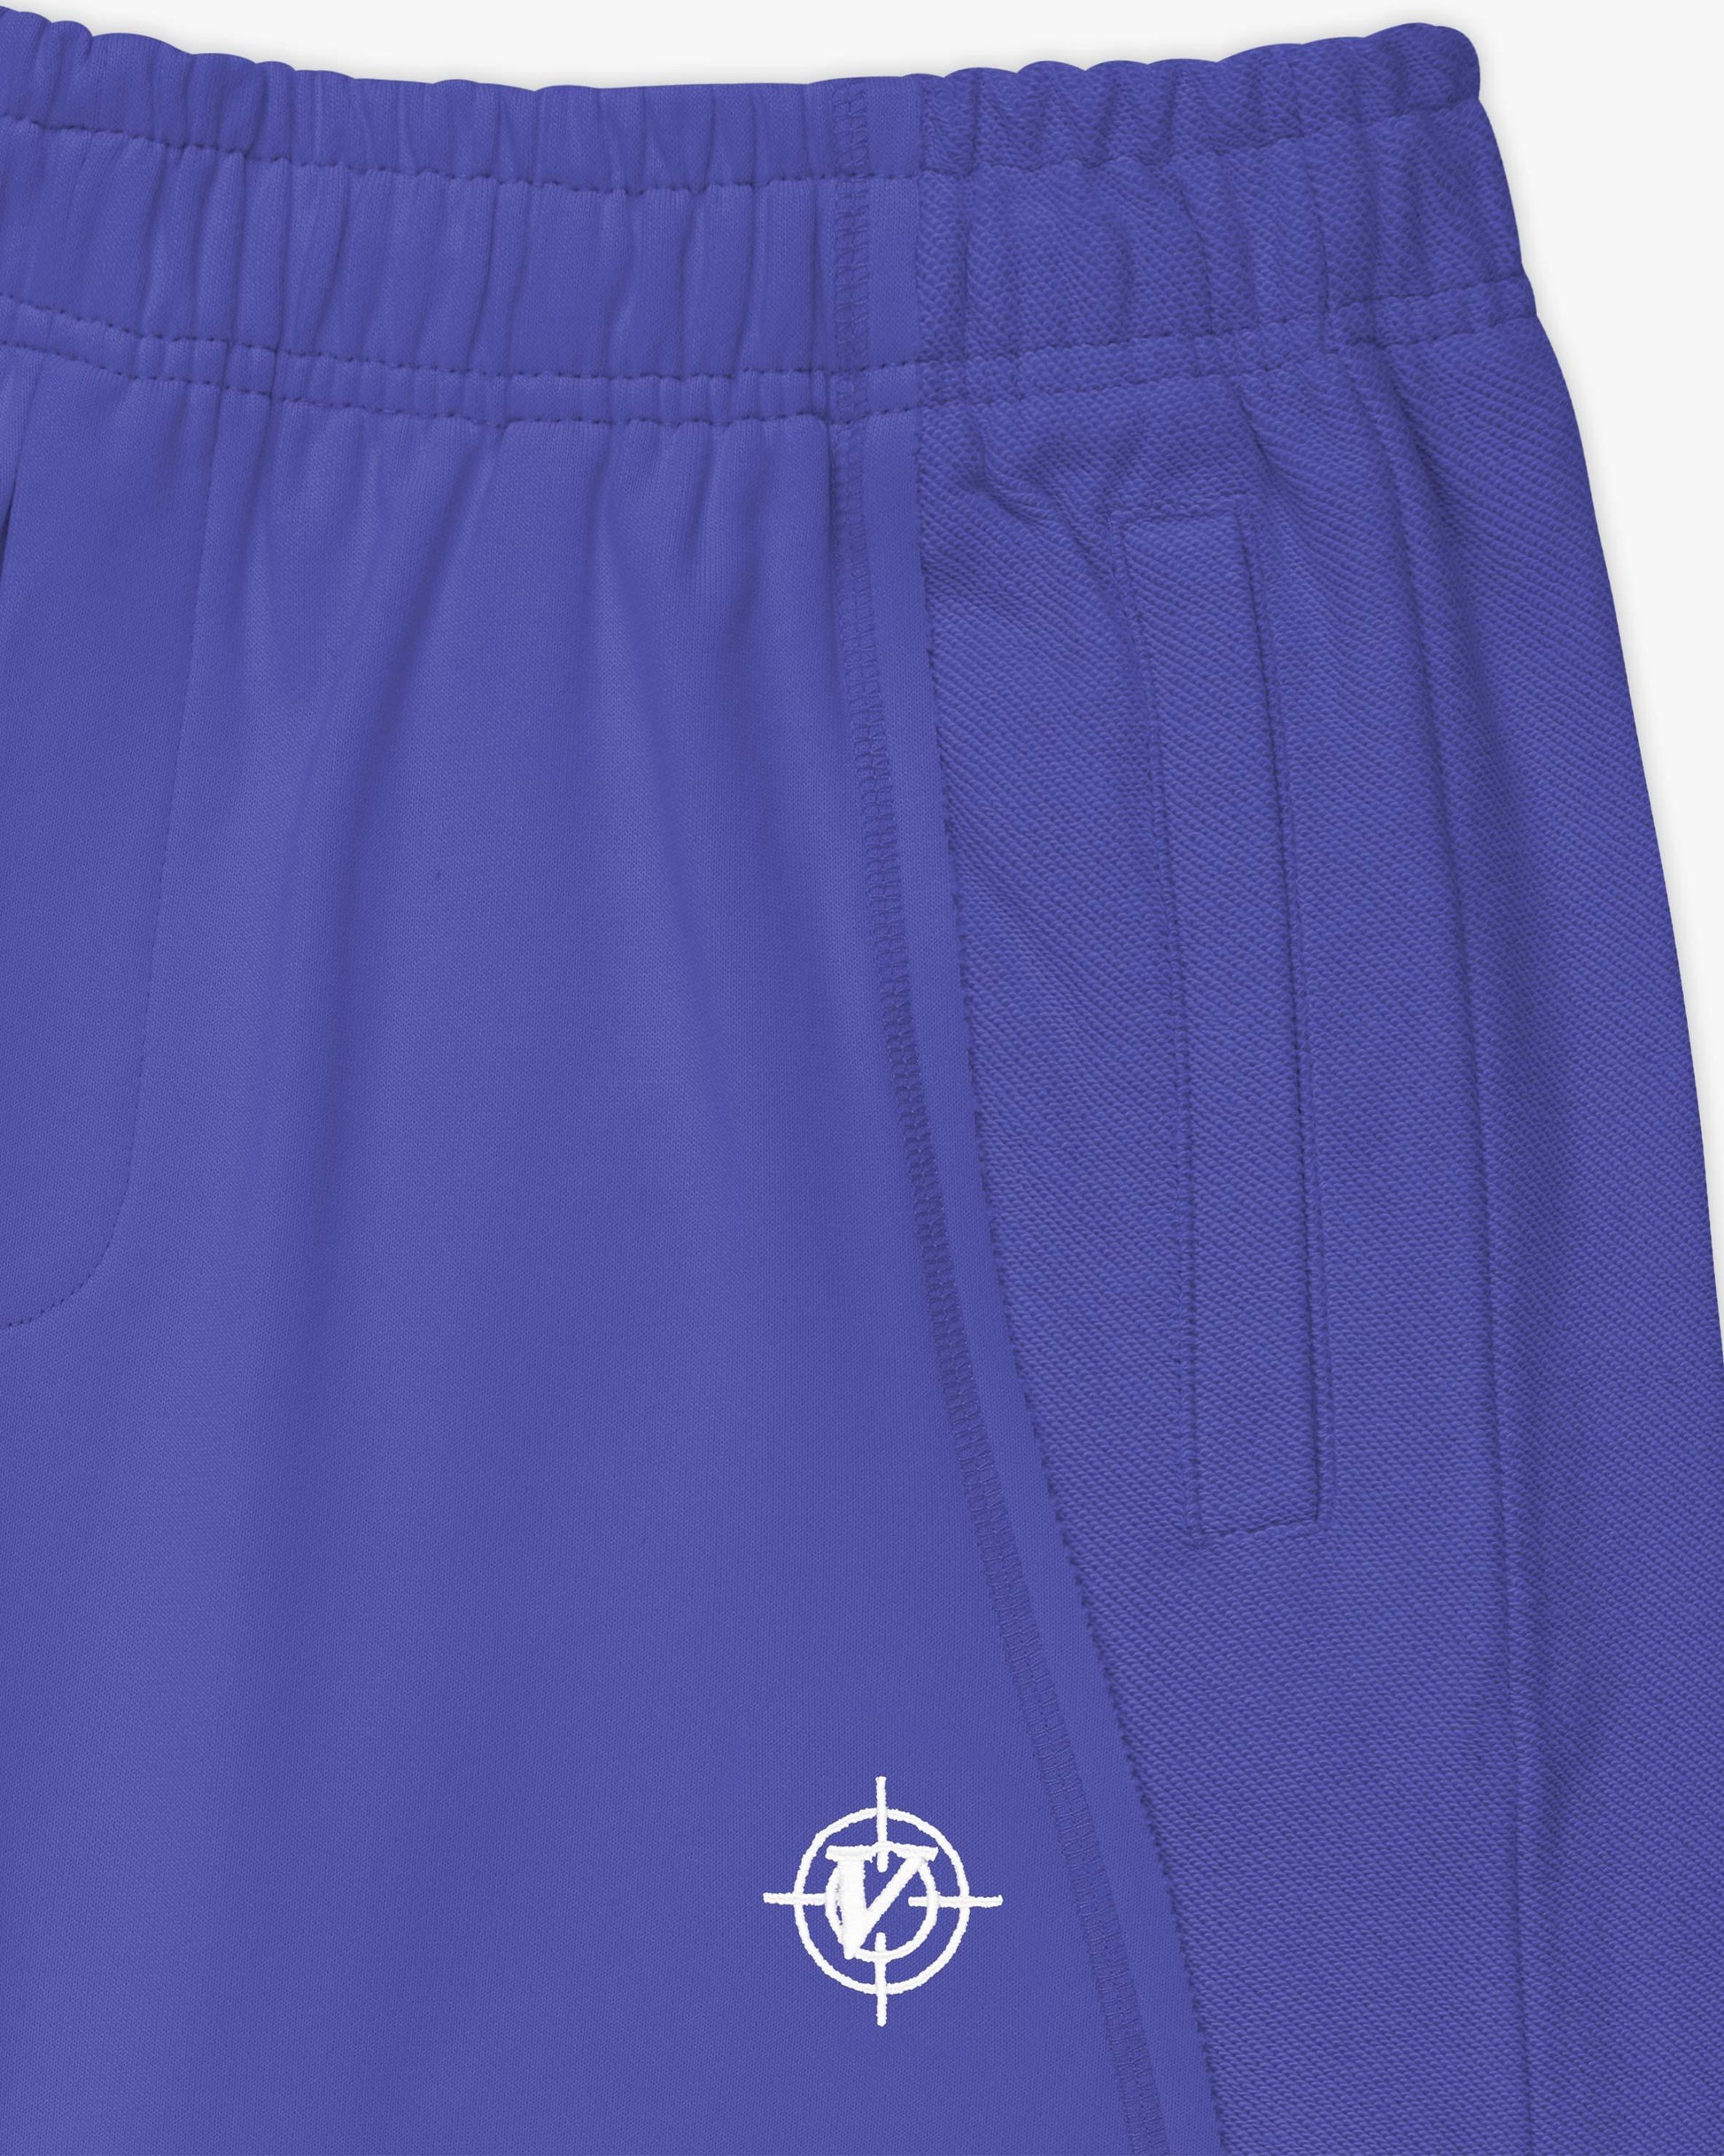 INSIDE OUT JOGGER OCEAN BLUE - VICINITY